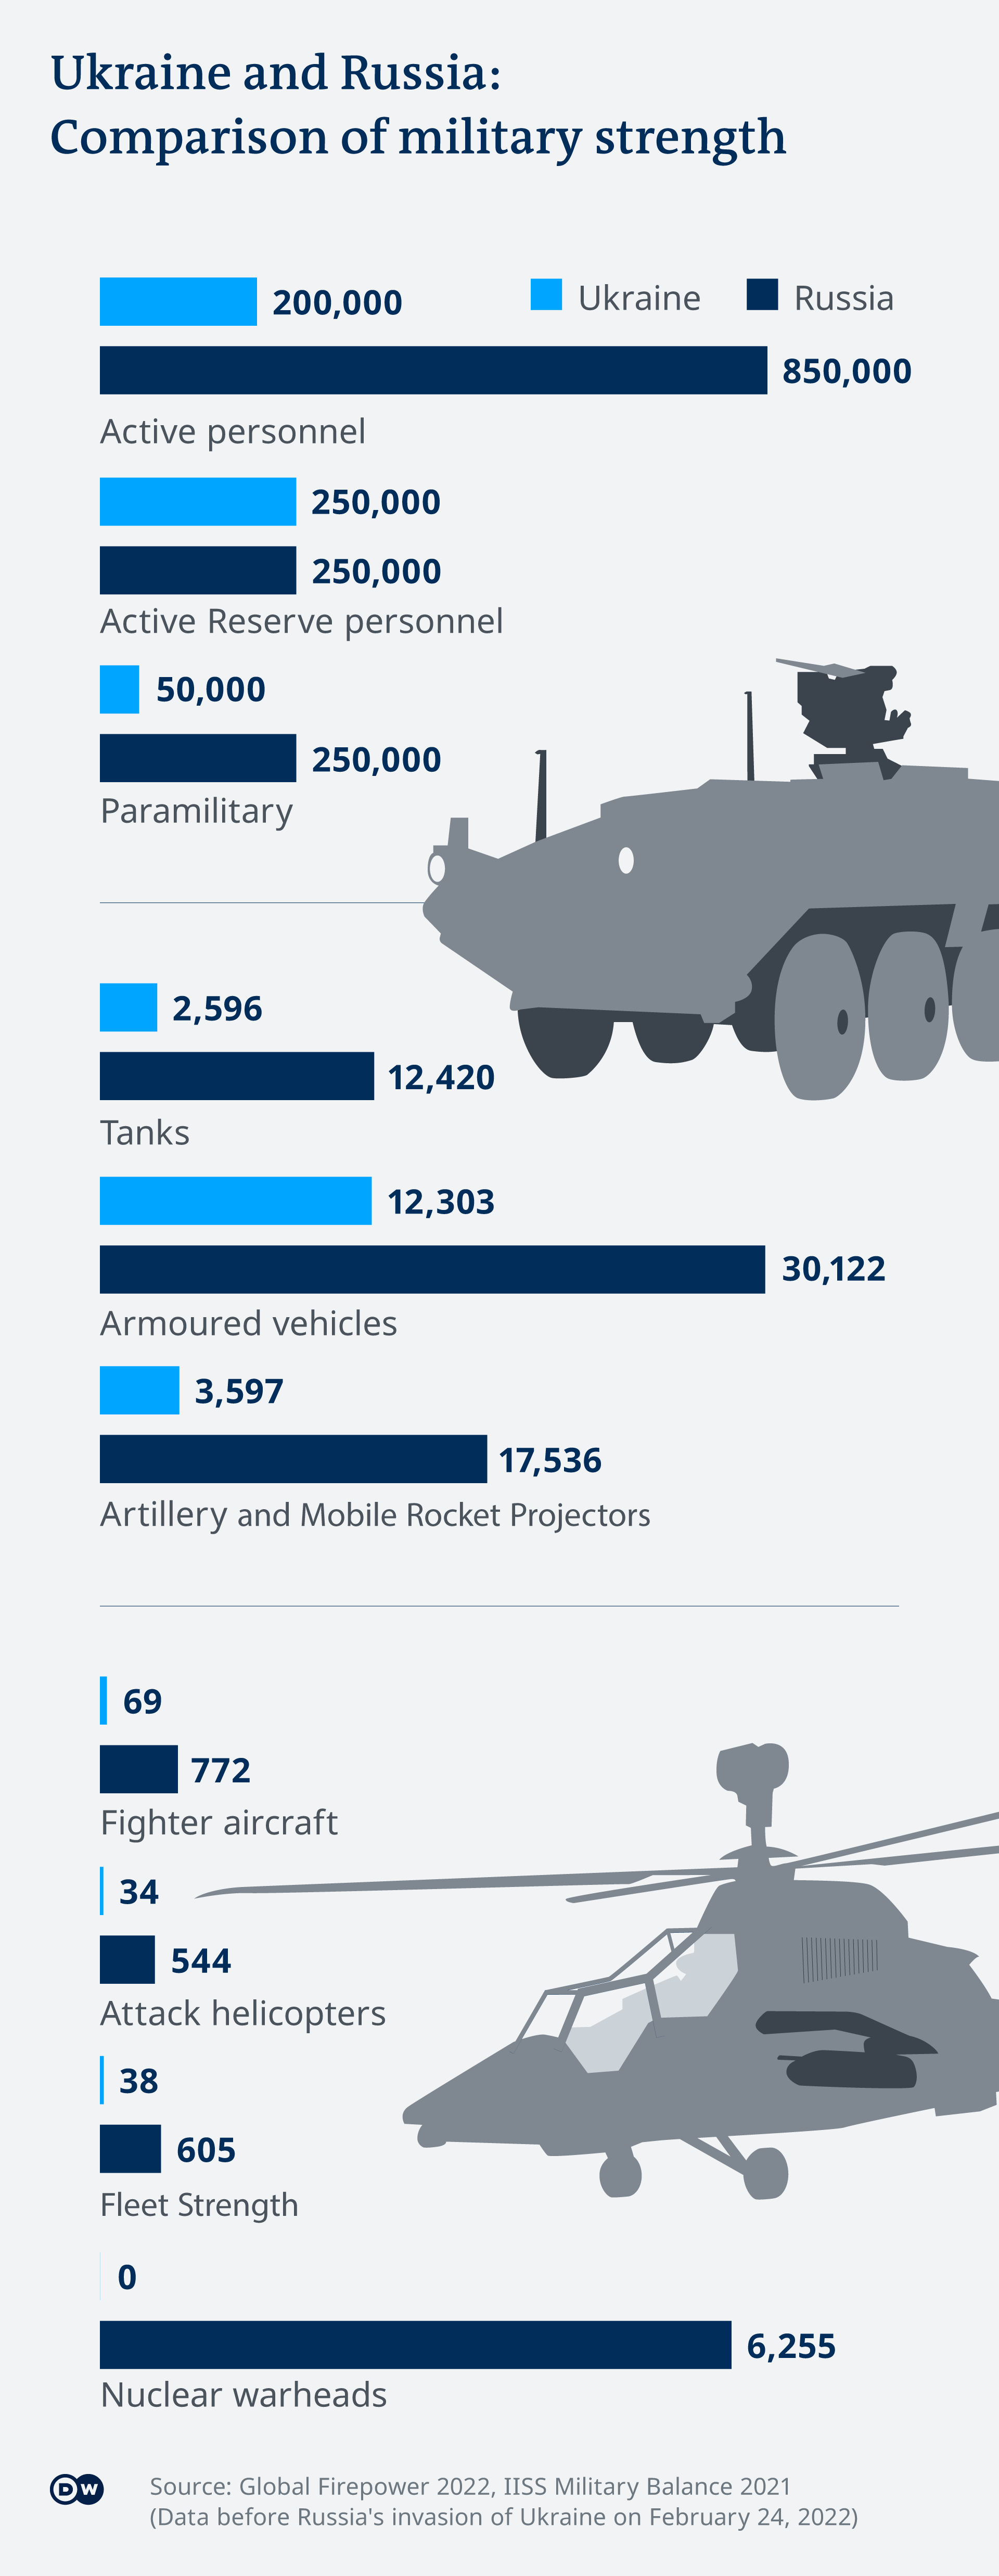 A chart comparing the military capabilities of Russia and Ukraine